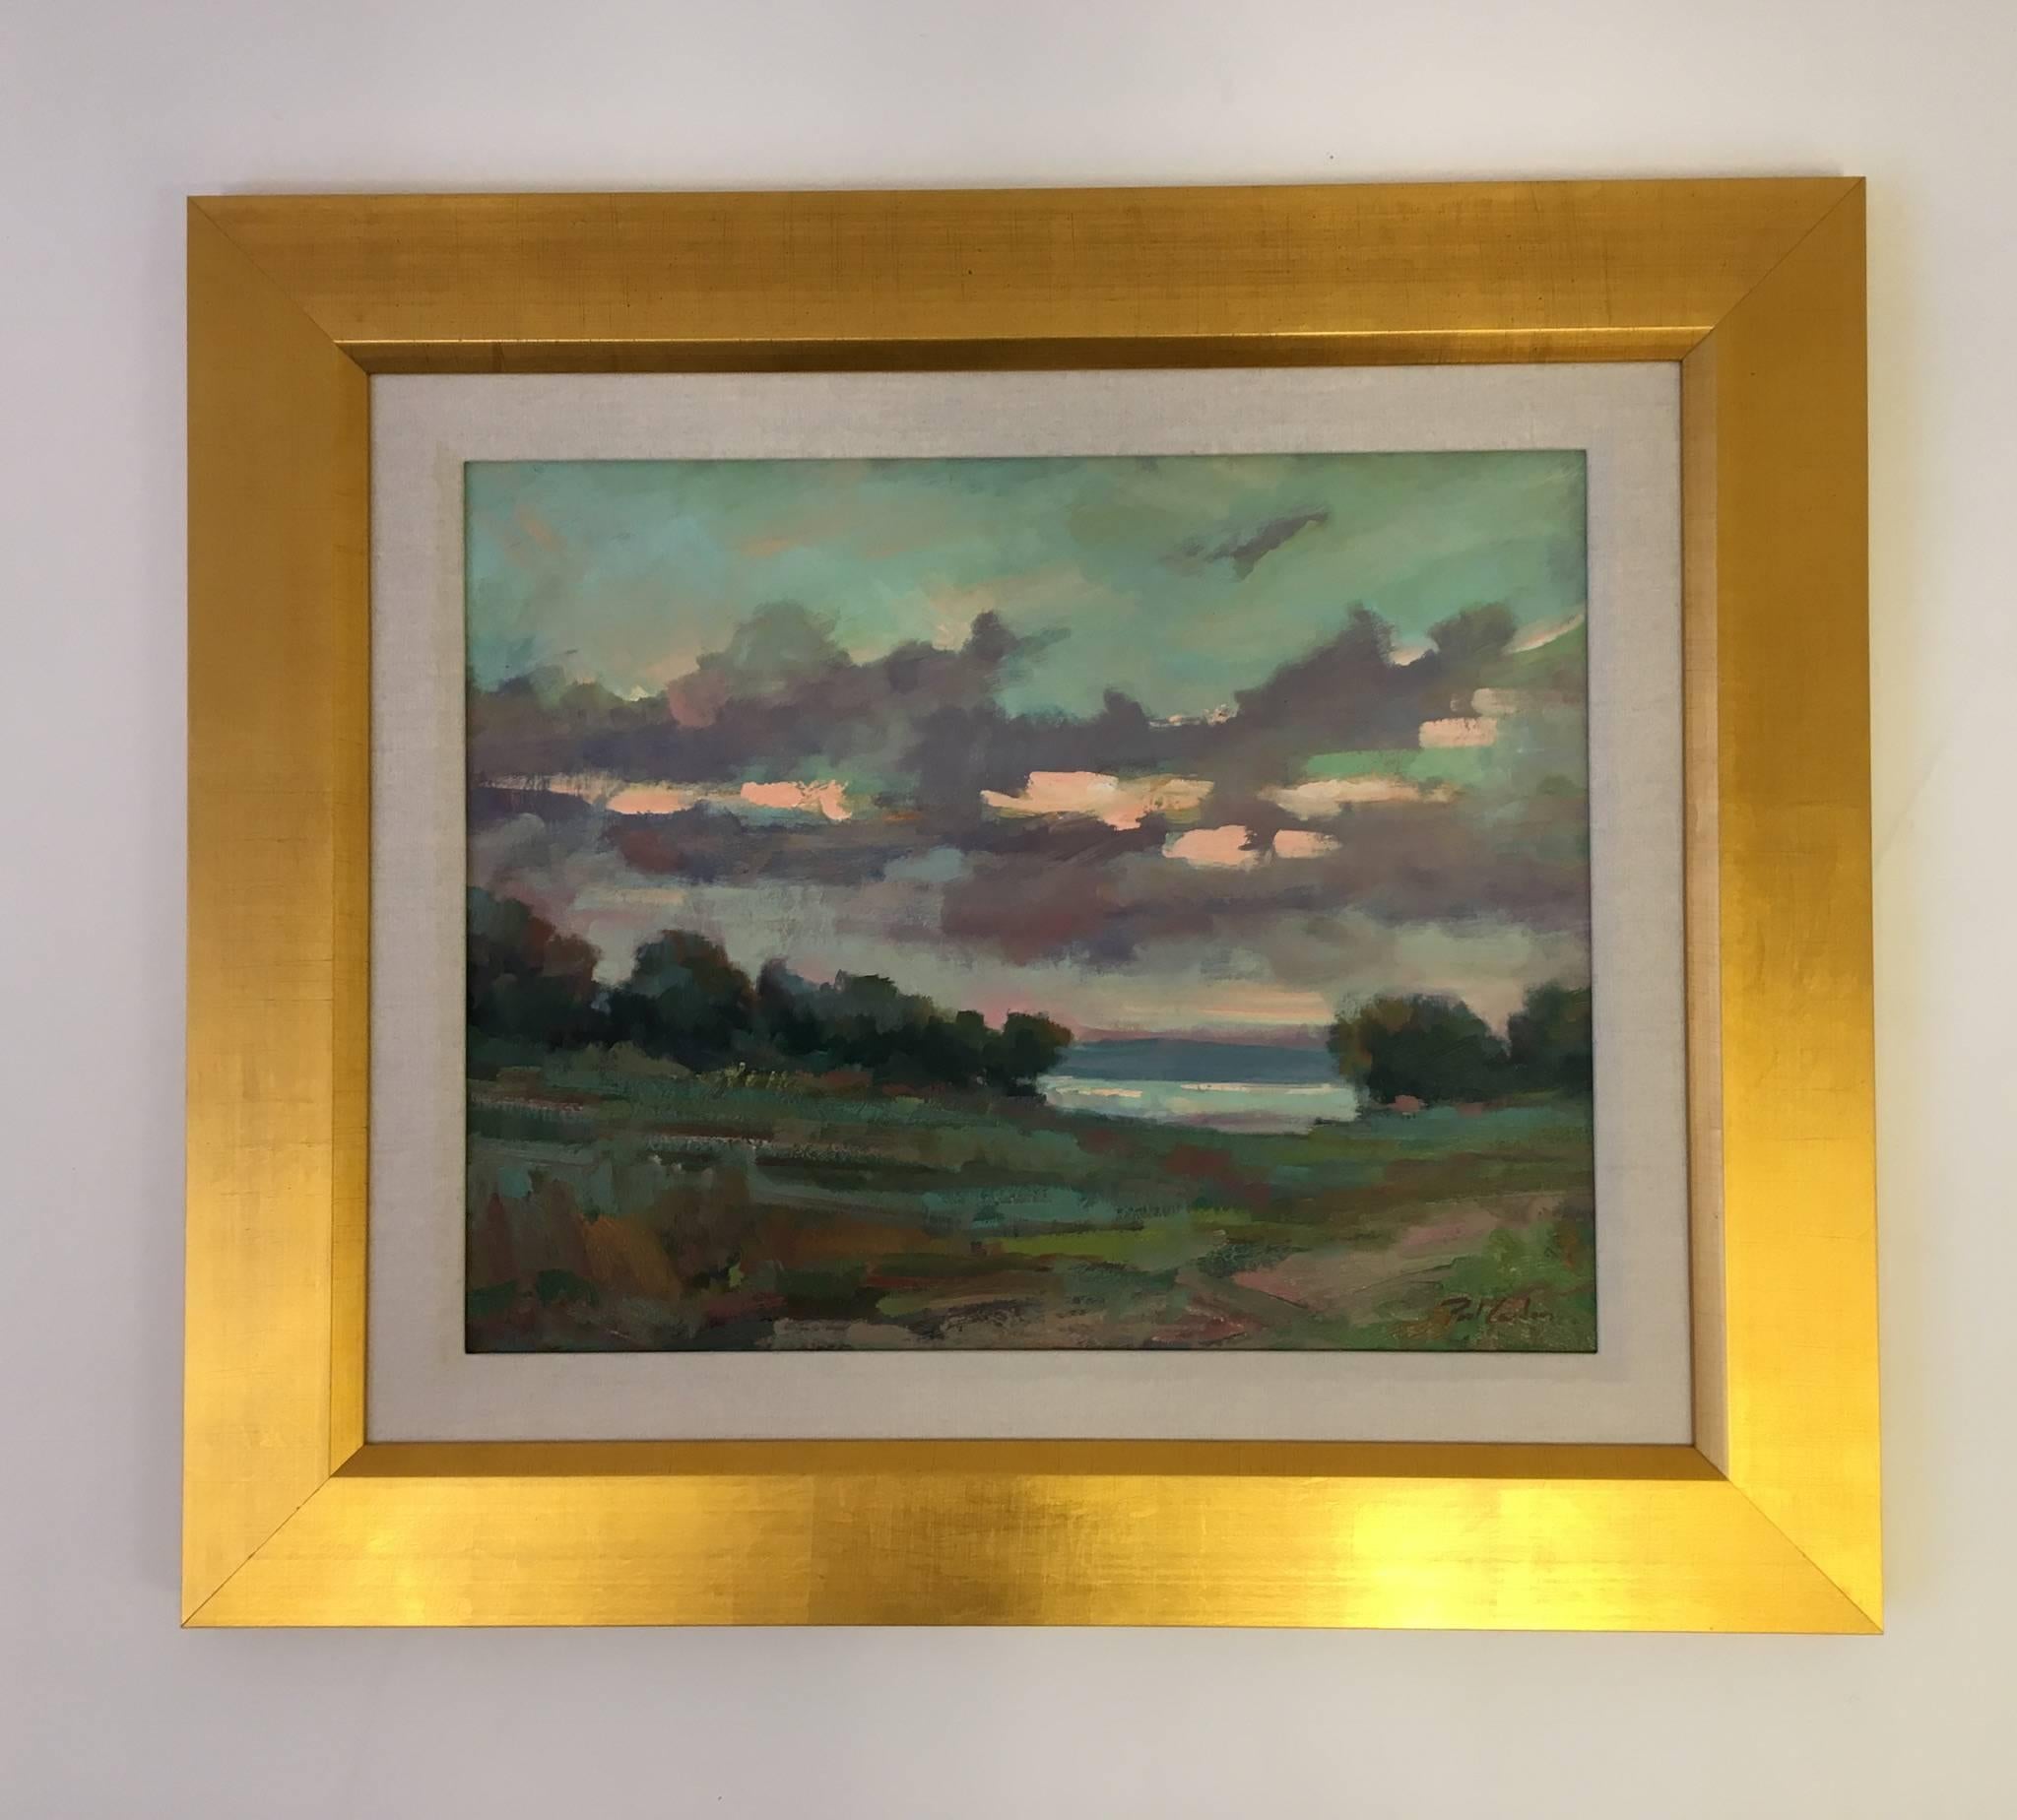 American Original Oil on Board Landscape Painting by Listed Artis Paul Casebeer